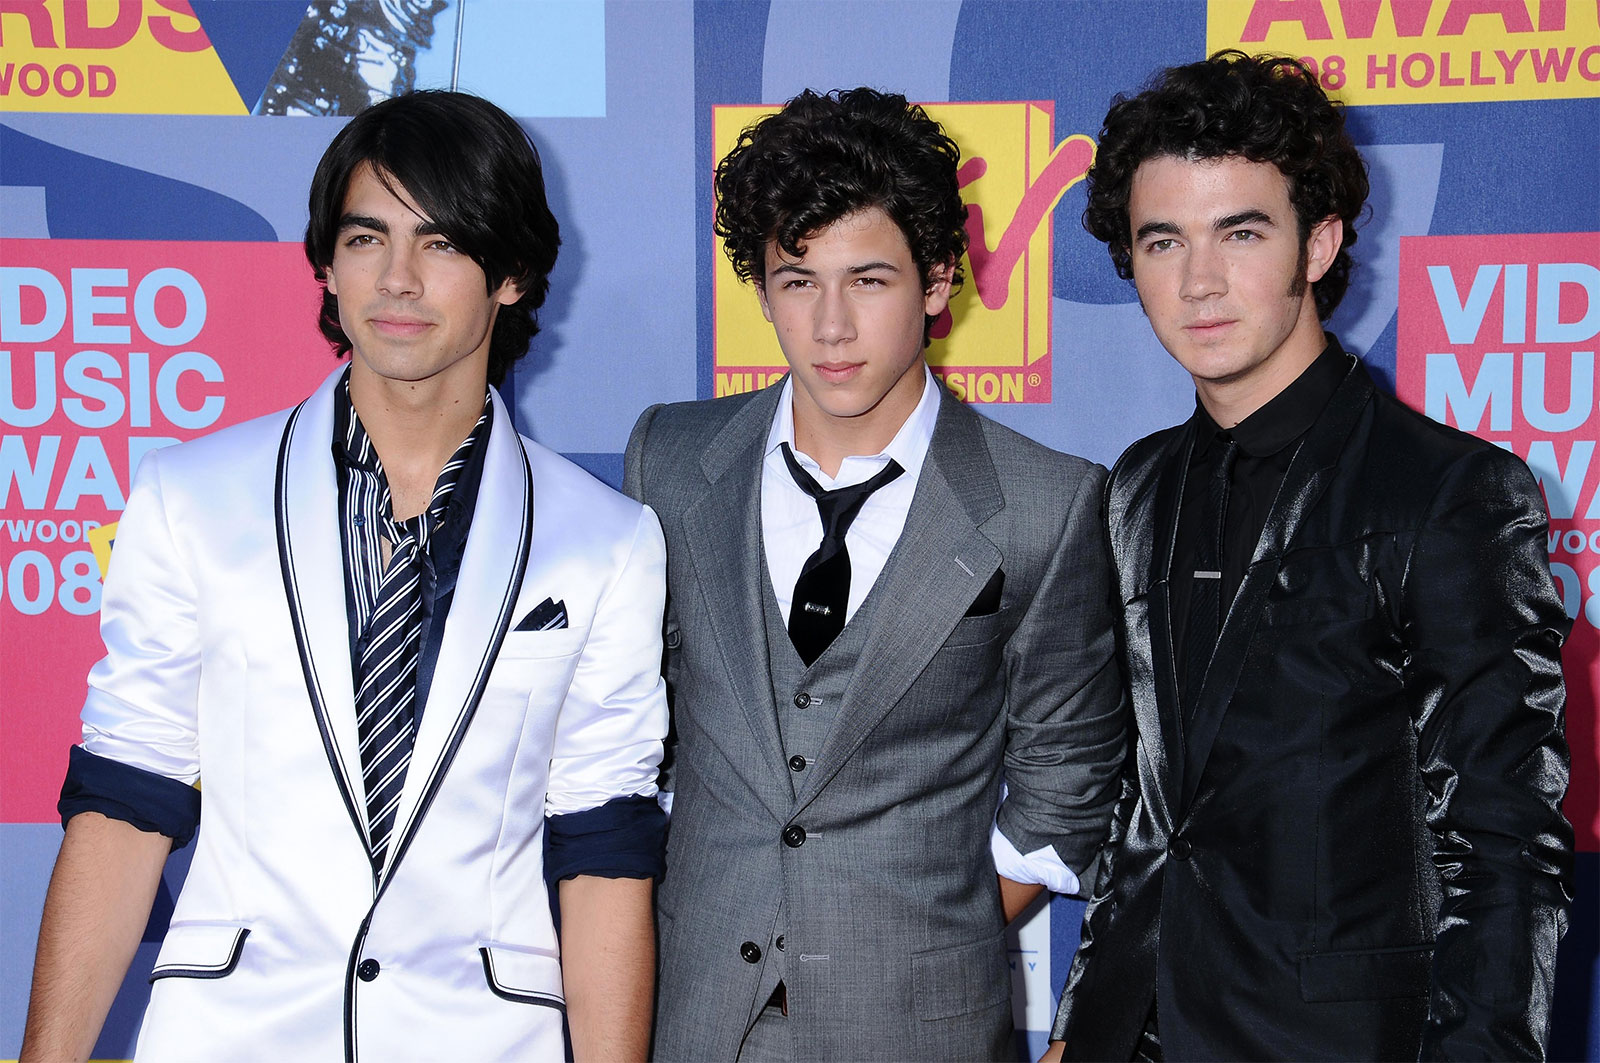 Who is the wealthiest Jonas brother?